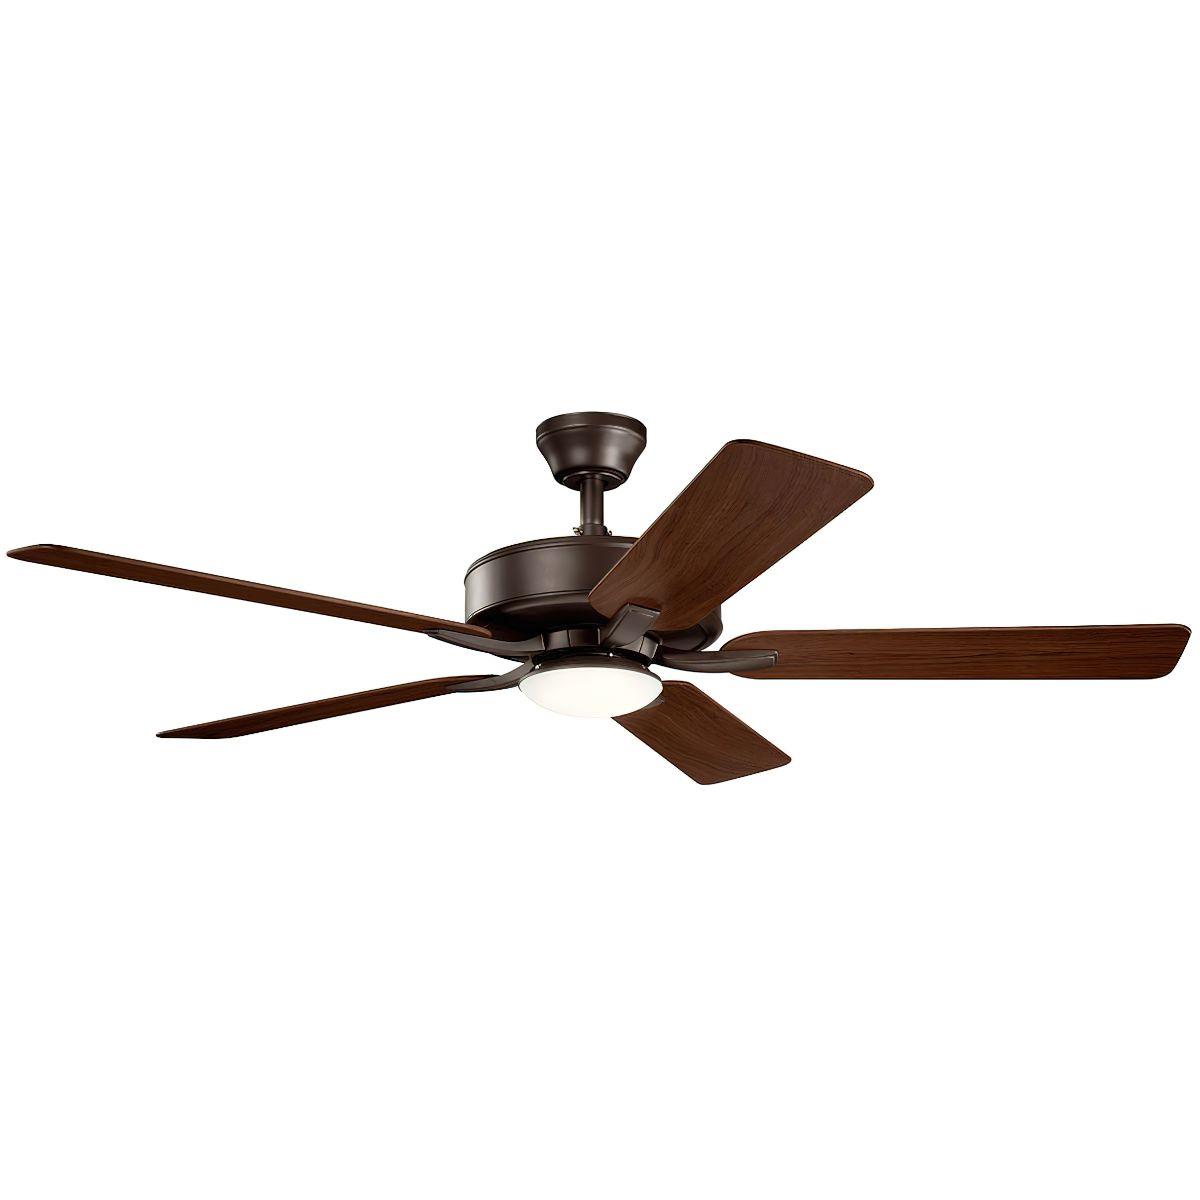 Basics Pro 52 Inch Indoor/Outdoor Ceiling Fan With Light And Remote